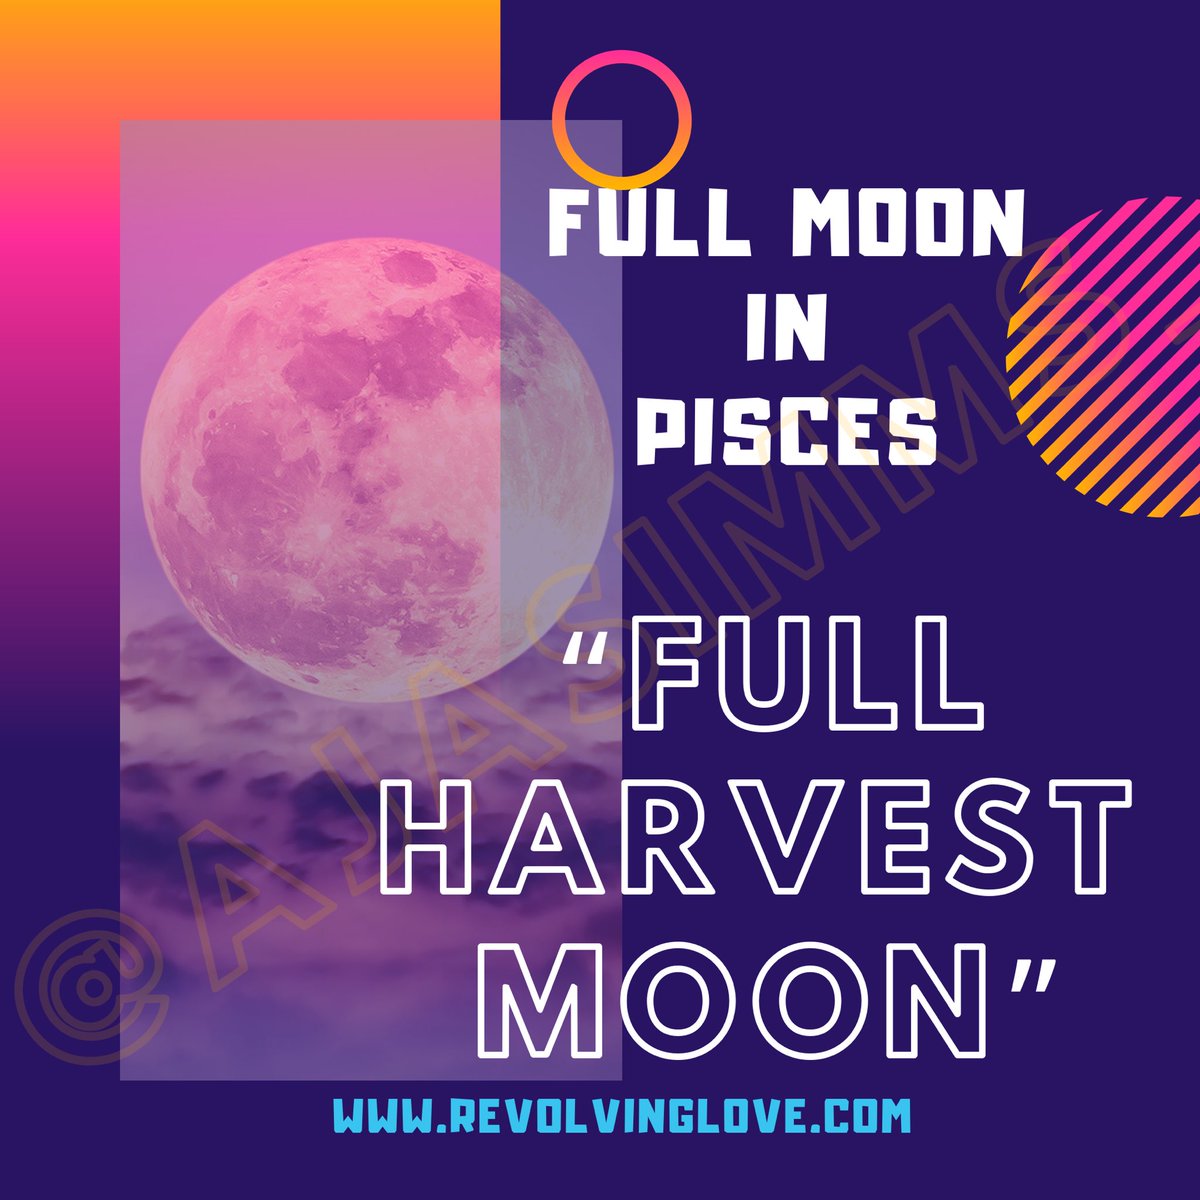 Blessings💚 @4everaja
#TheFullHarvestMoon #HarvestMoonInPisces #PiscesFullMoon #Harvest #Fun #Rewards #FullMoon #LettingGo #FullMoonRelease #HarvestMoon2019 #HarvestBlessings  #SeptemberFullMoon2019 #TheFullCornMoon #BarleyMoon #MoonCycles #Astrology #RevolvingLove